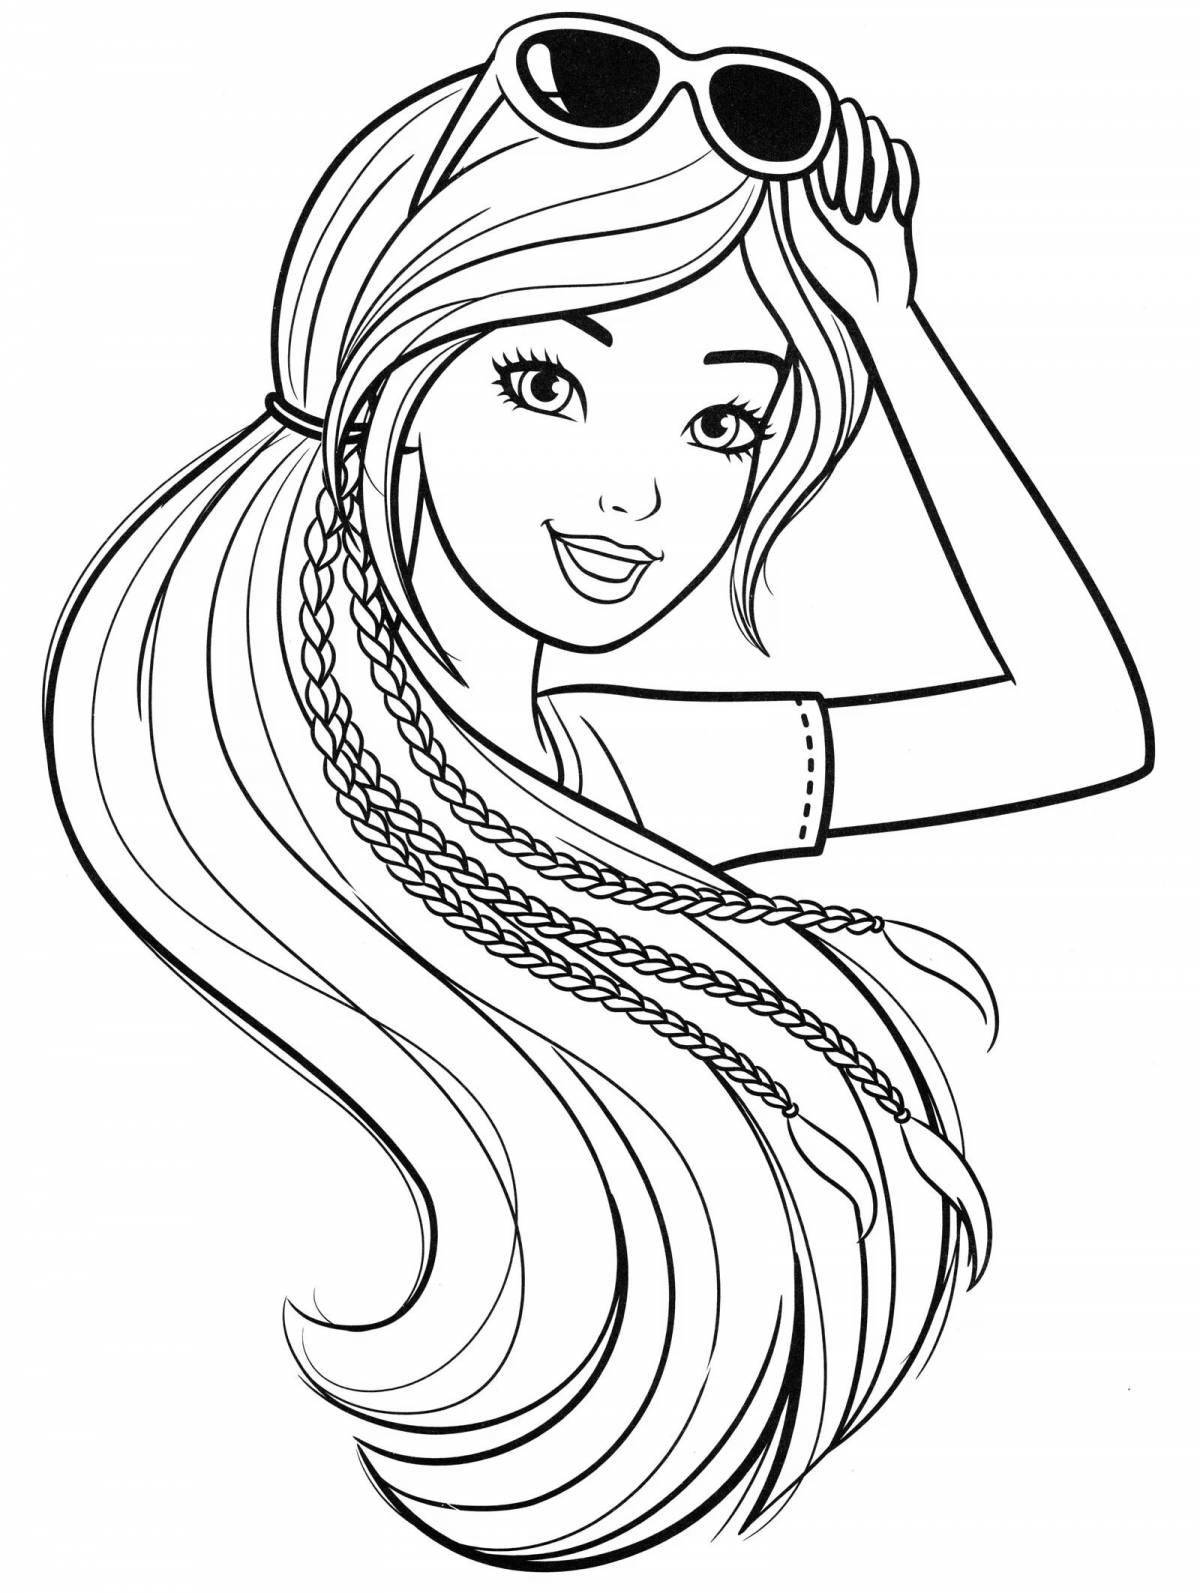 Fashion coloring for girls 6 years old